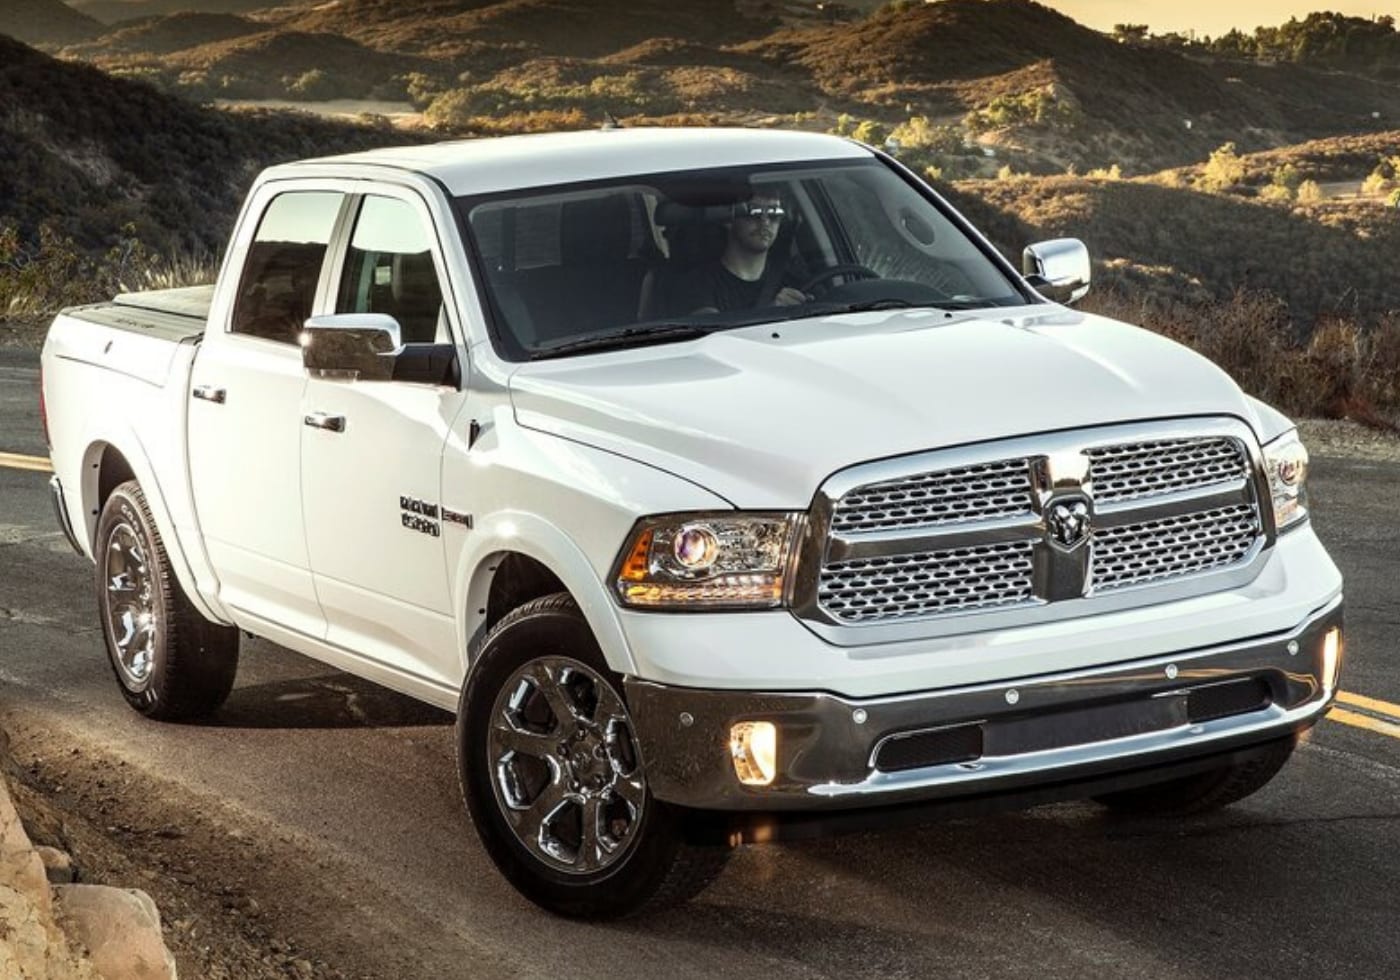 White 2014 Dodge Ram 1500 parked on a dirty road in the desert